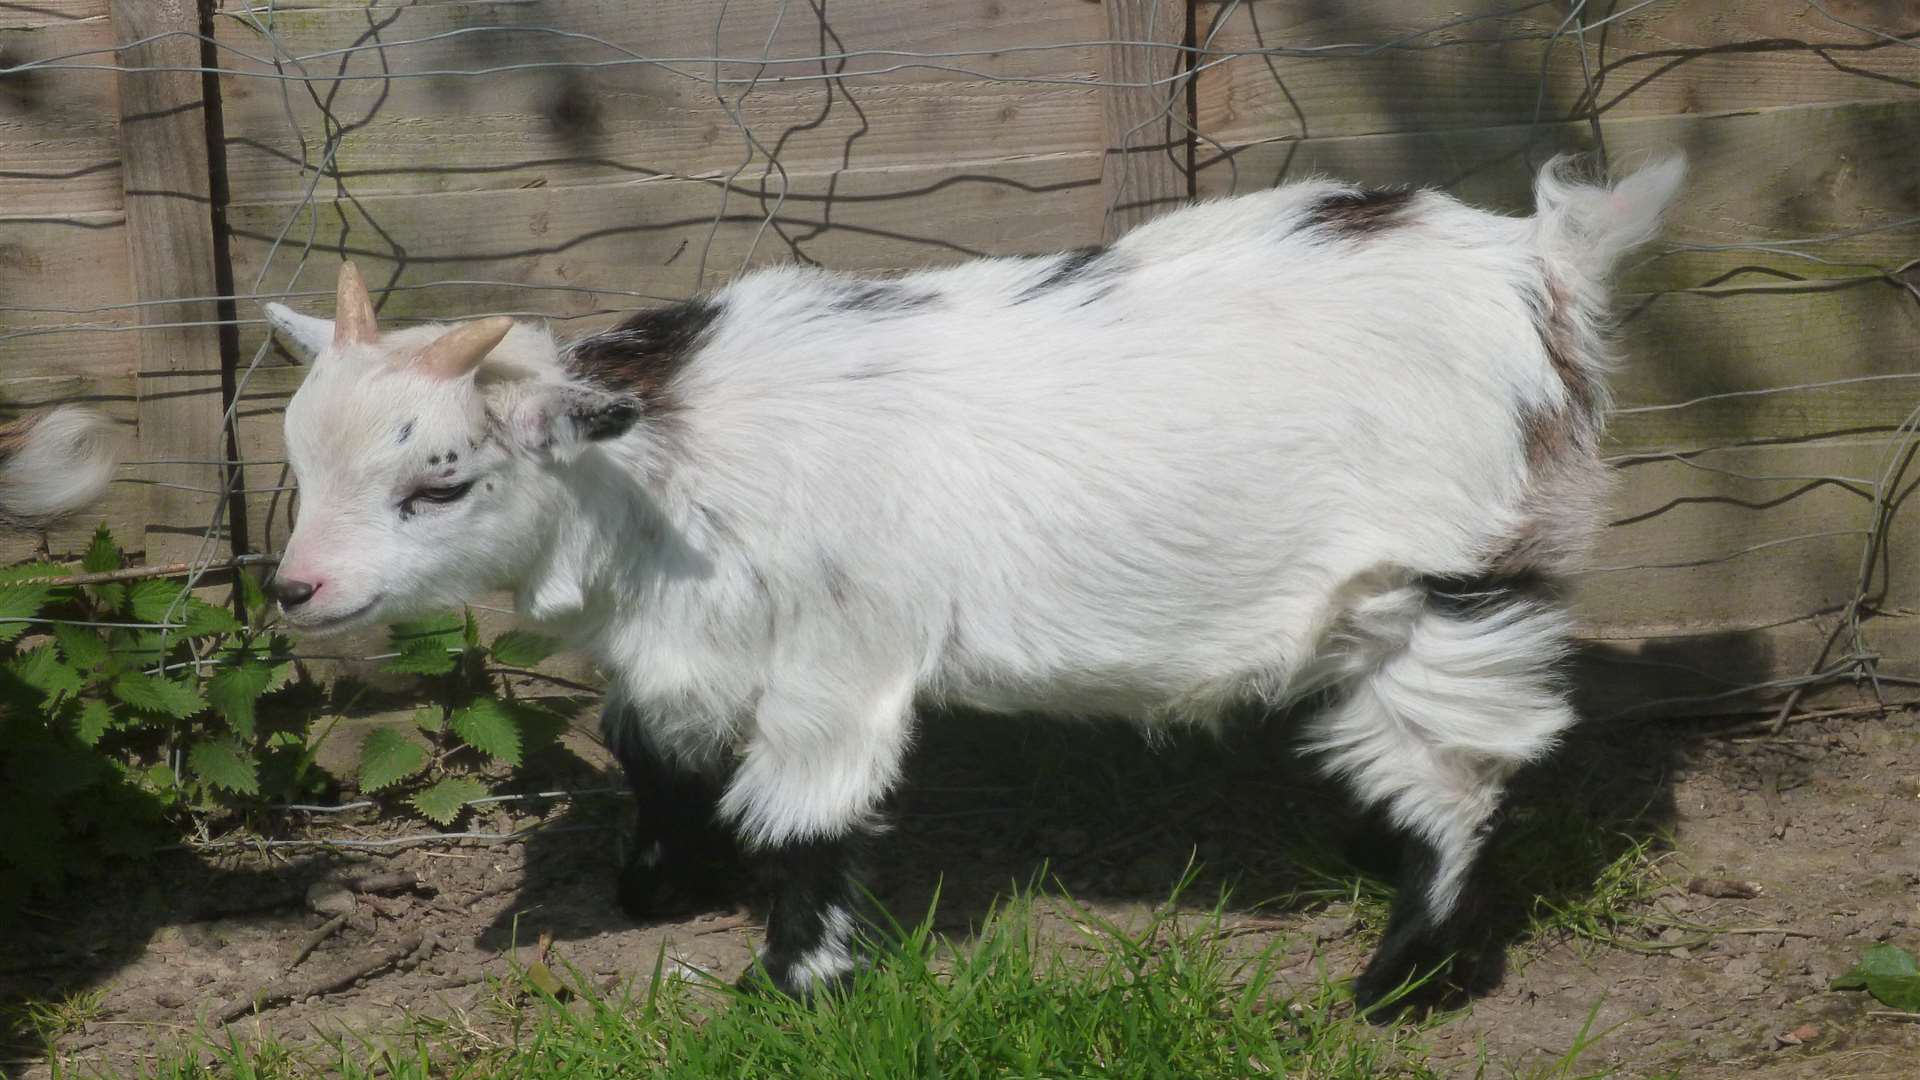 The pygmy goats stand 14 inches tall. Pic by Hilary Breakell